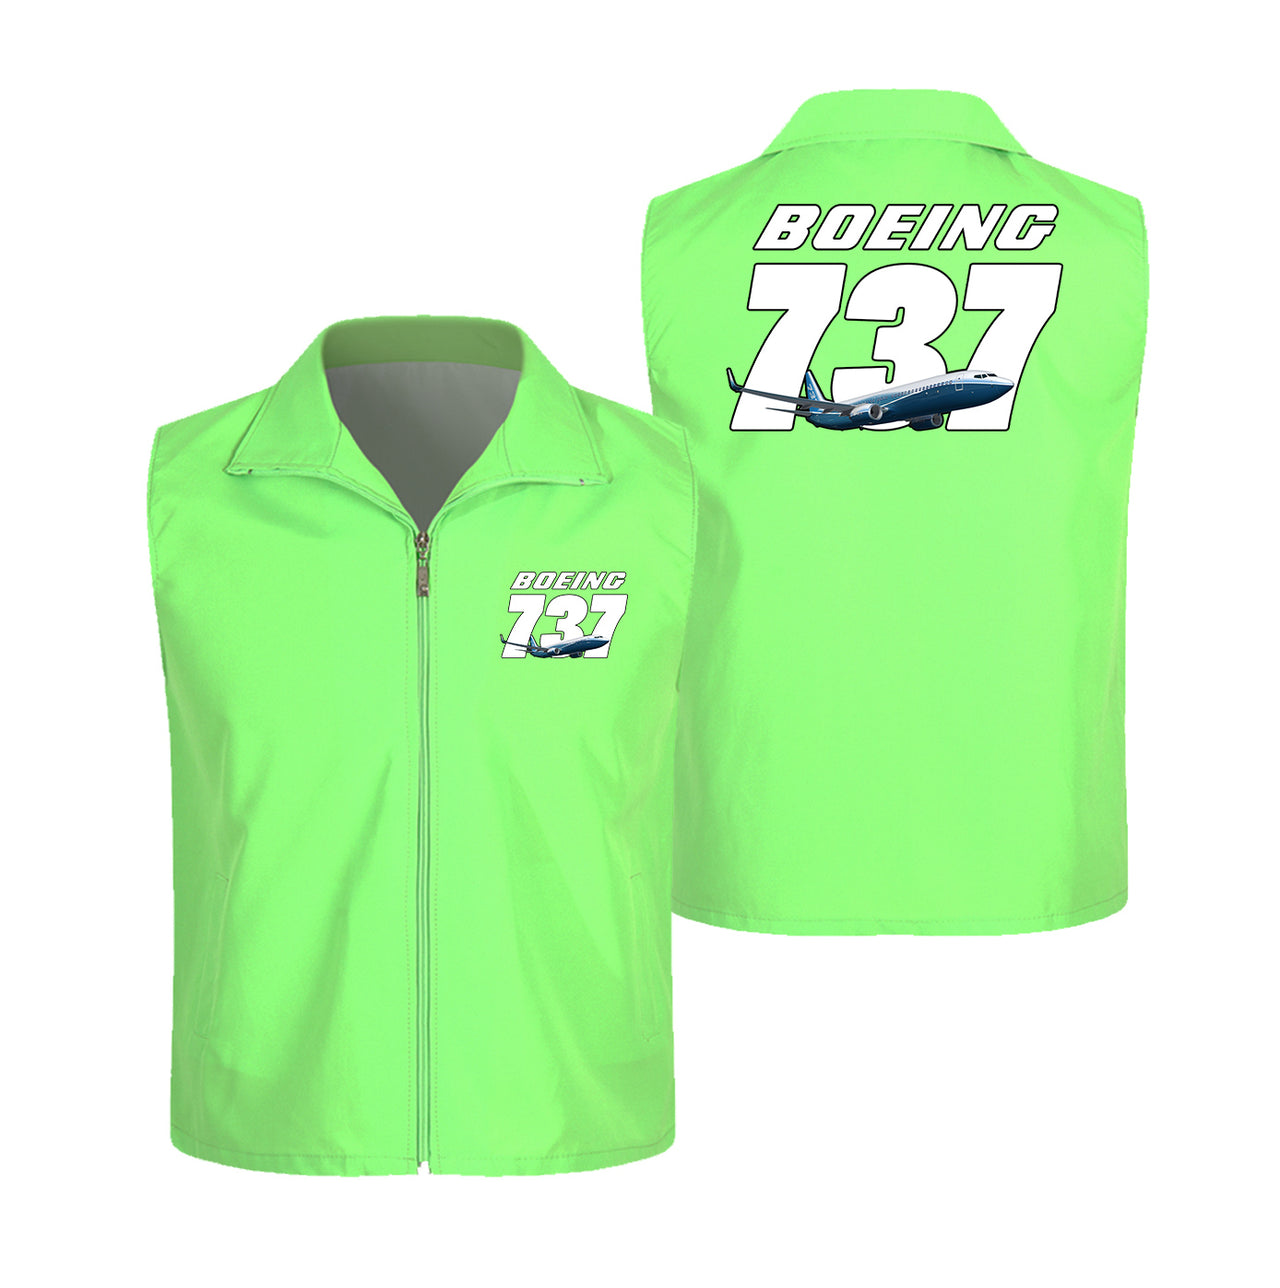 Super Boeing 737+Text Designed Thin Style Vests